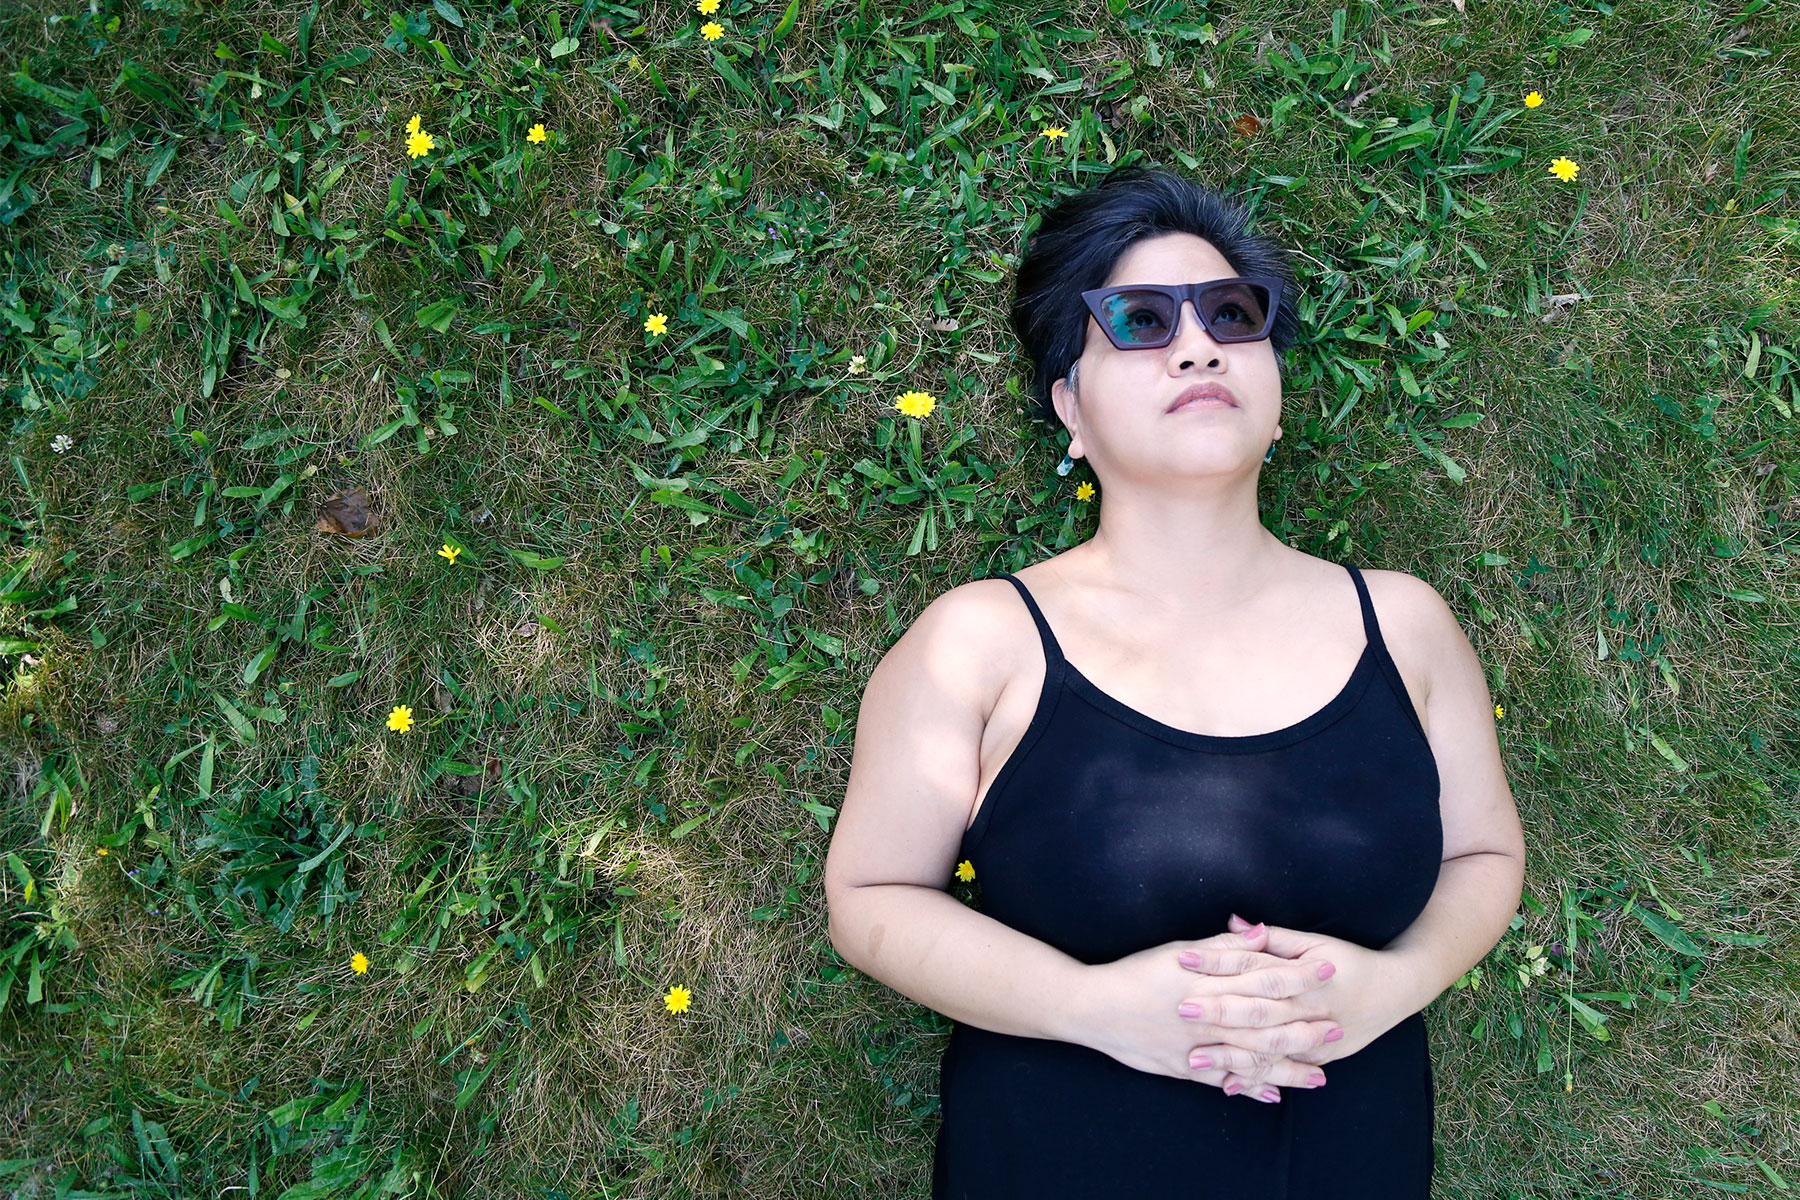 Photograph of essay author Fran Flaherty, a Filipino woman wearing sunglasses and a black jumpsuit. She's lying in the grass with small yellow wildflowers around her.